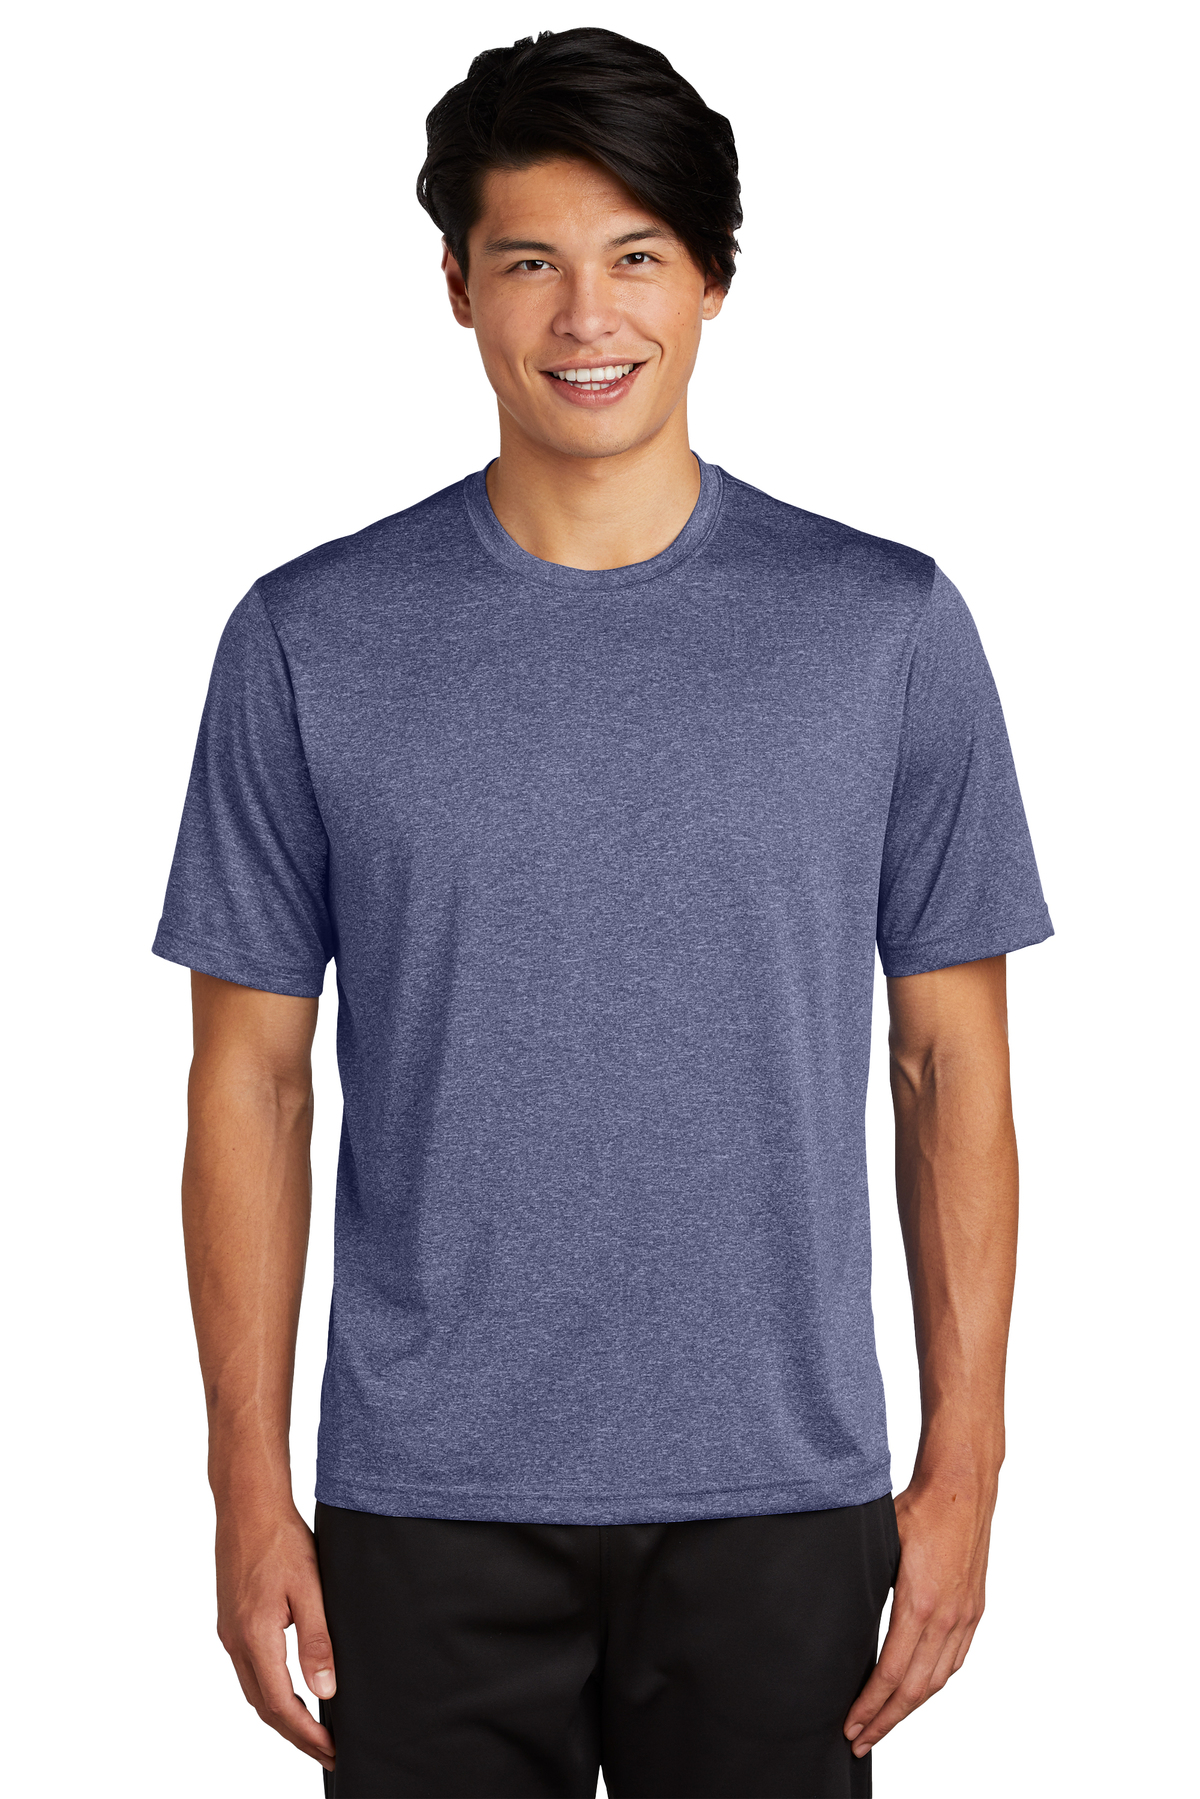 click to view True Navy Heather